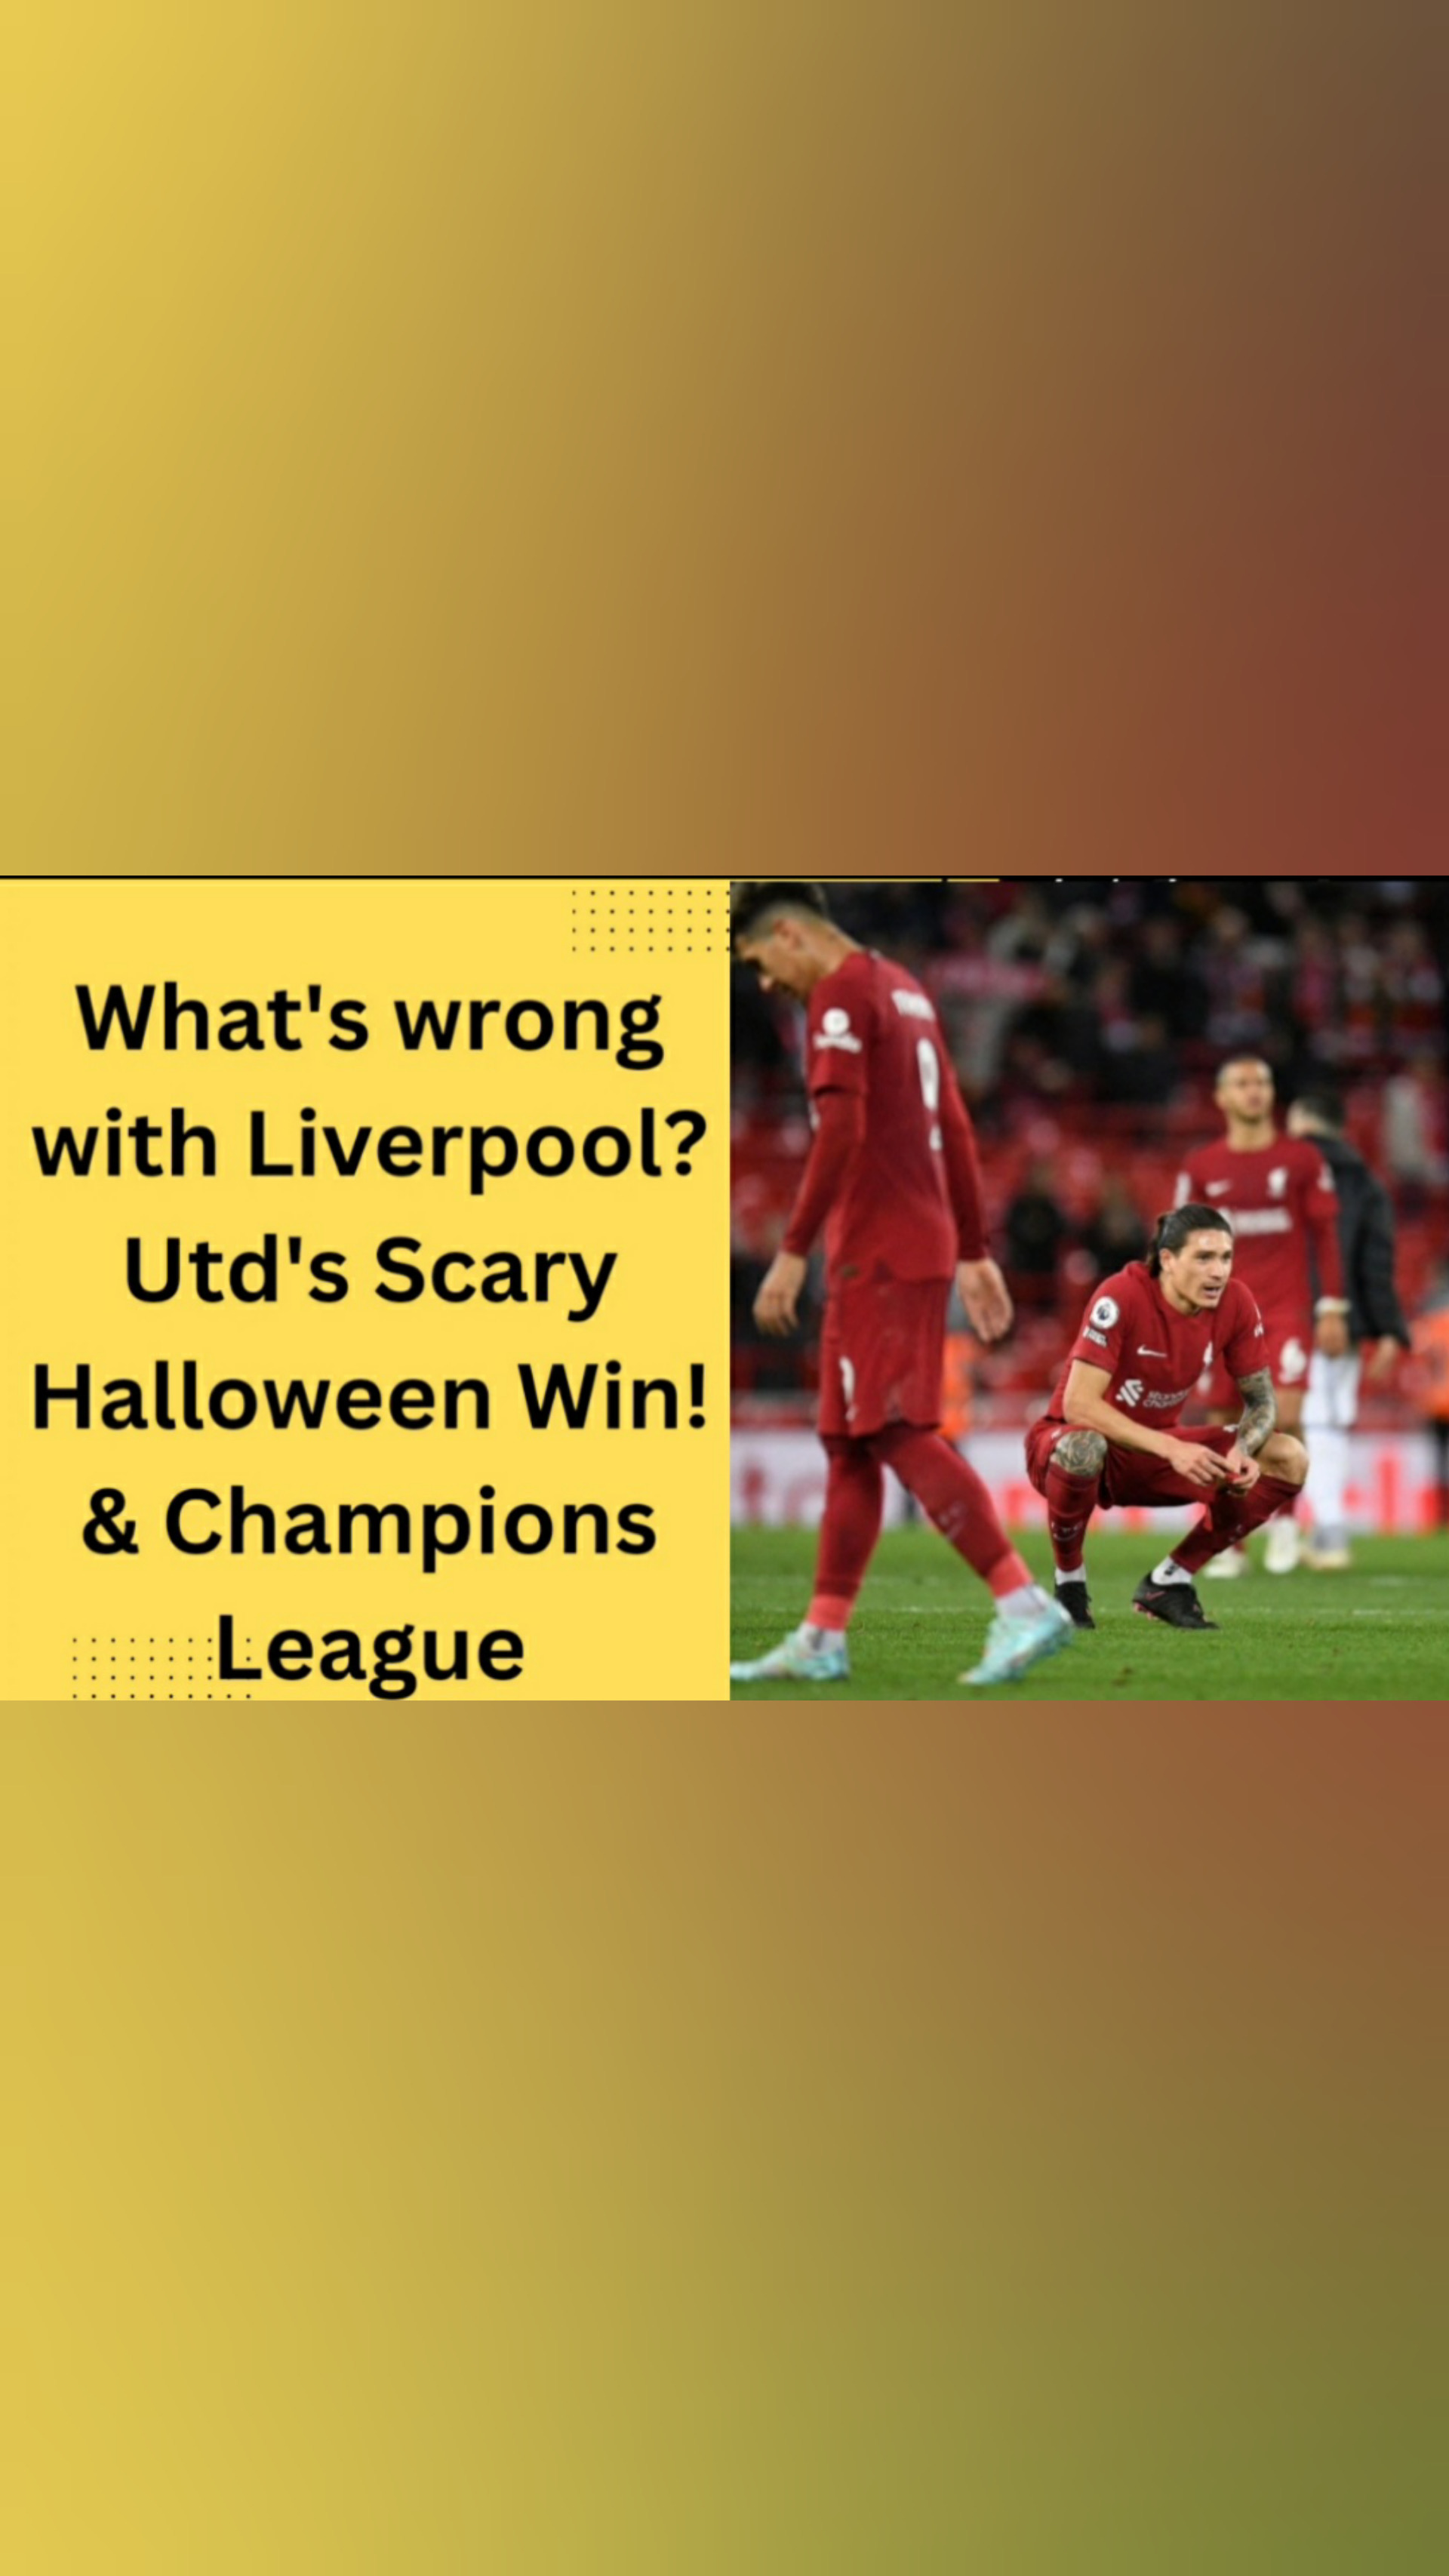 What’s Wrong With Liverpool? Utd Get A Scary Win For Halloween & Champions League!!!!